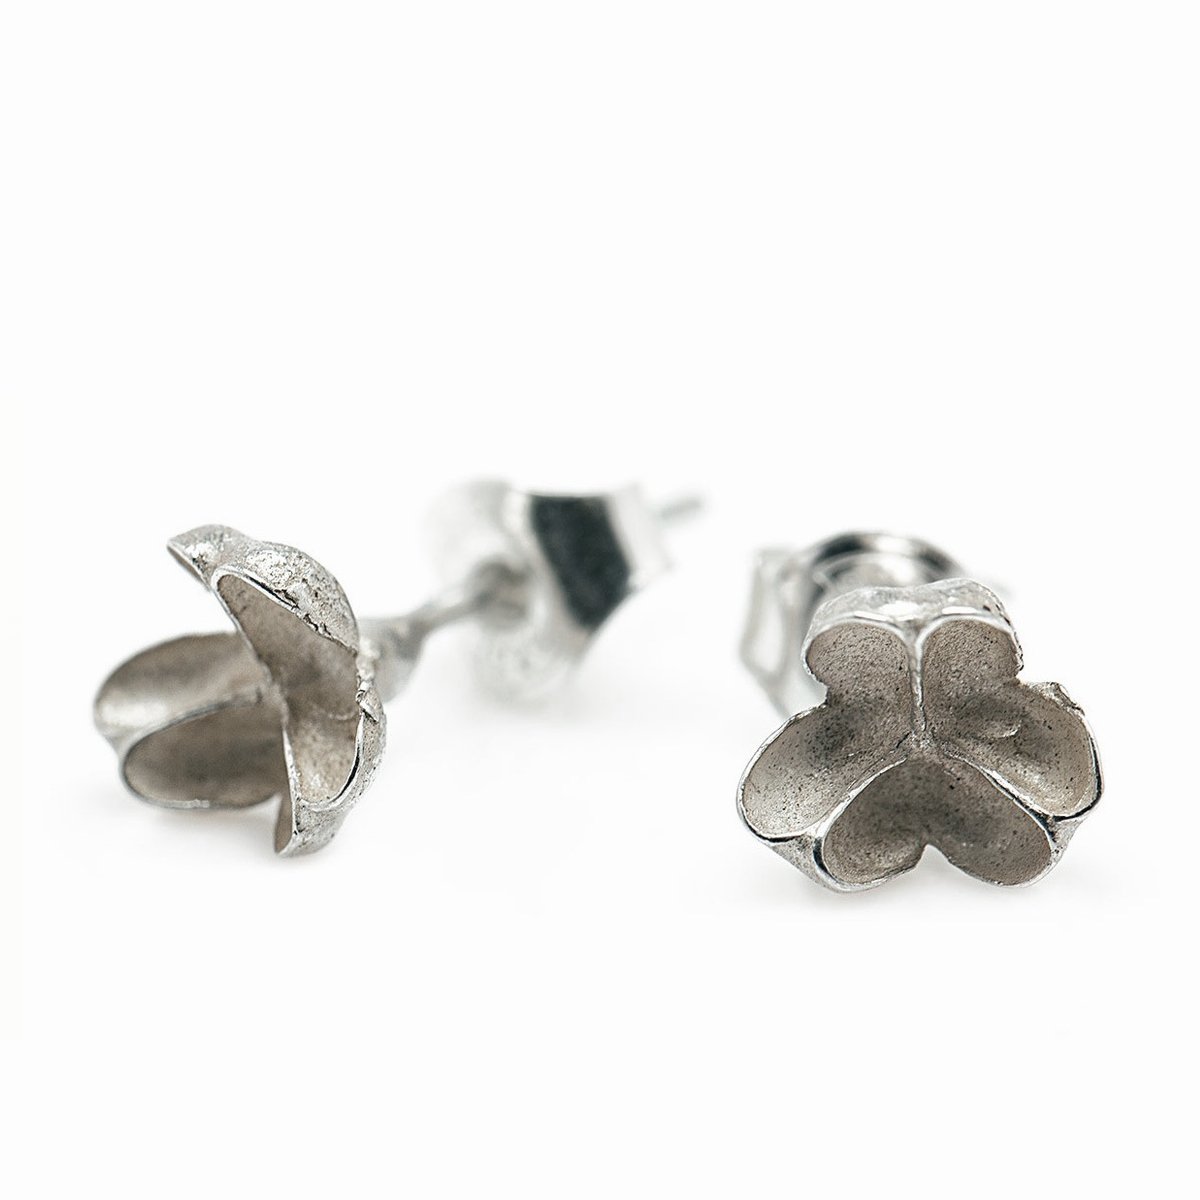 The seed capsule studs - Silver